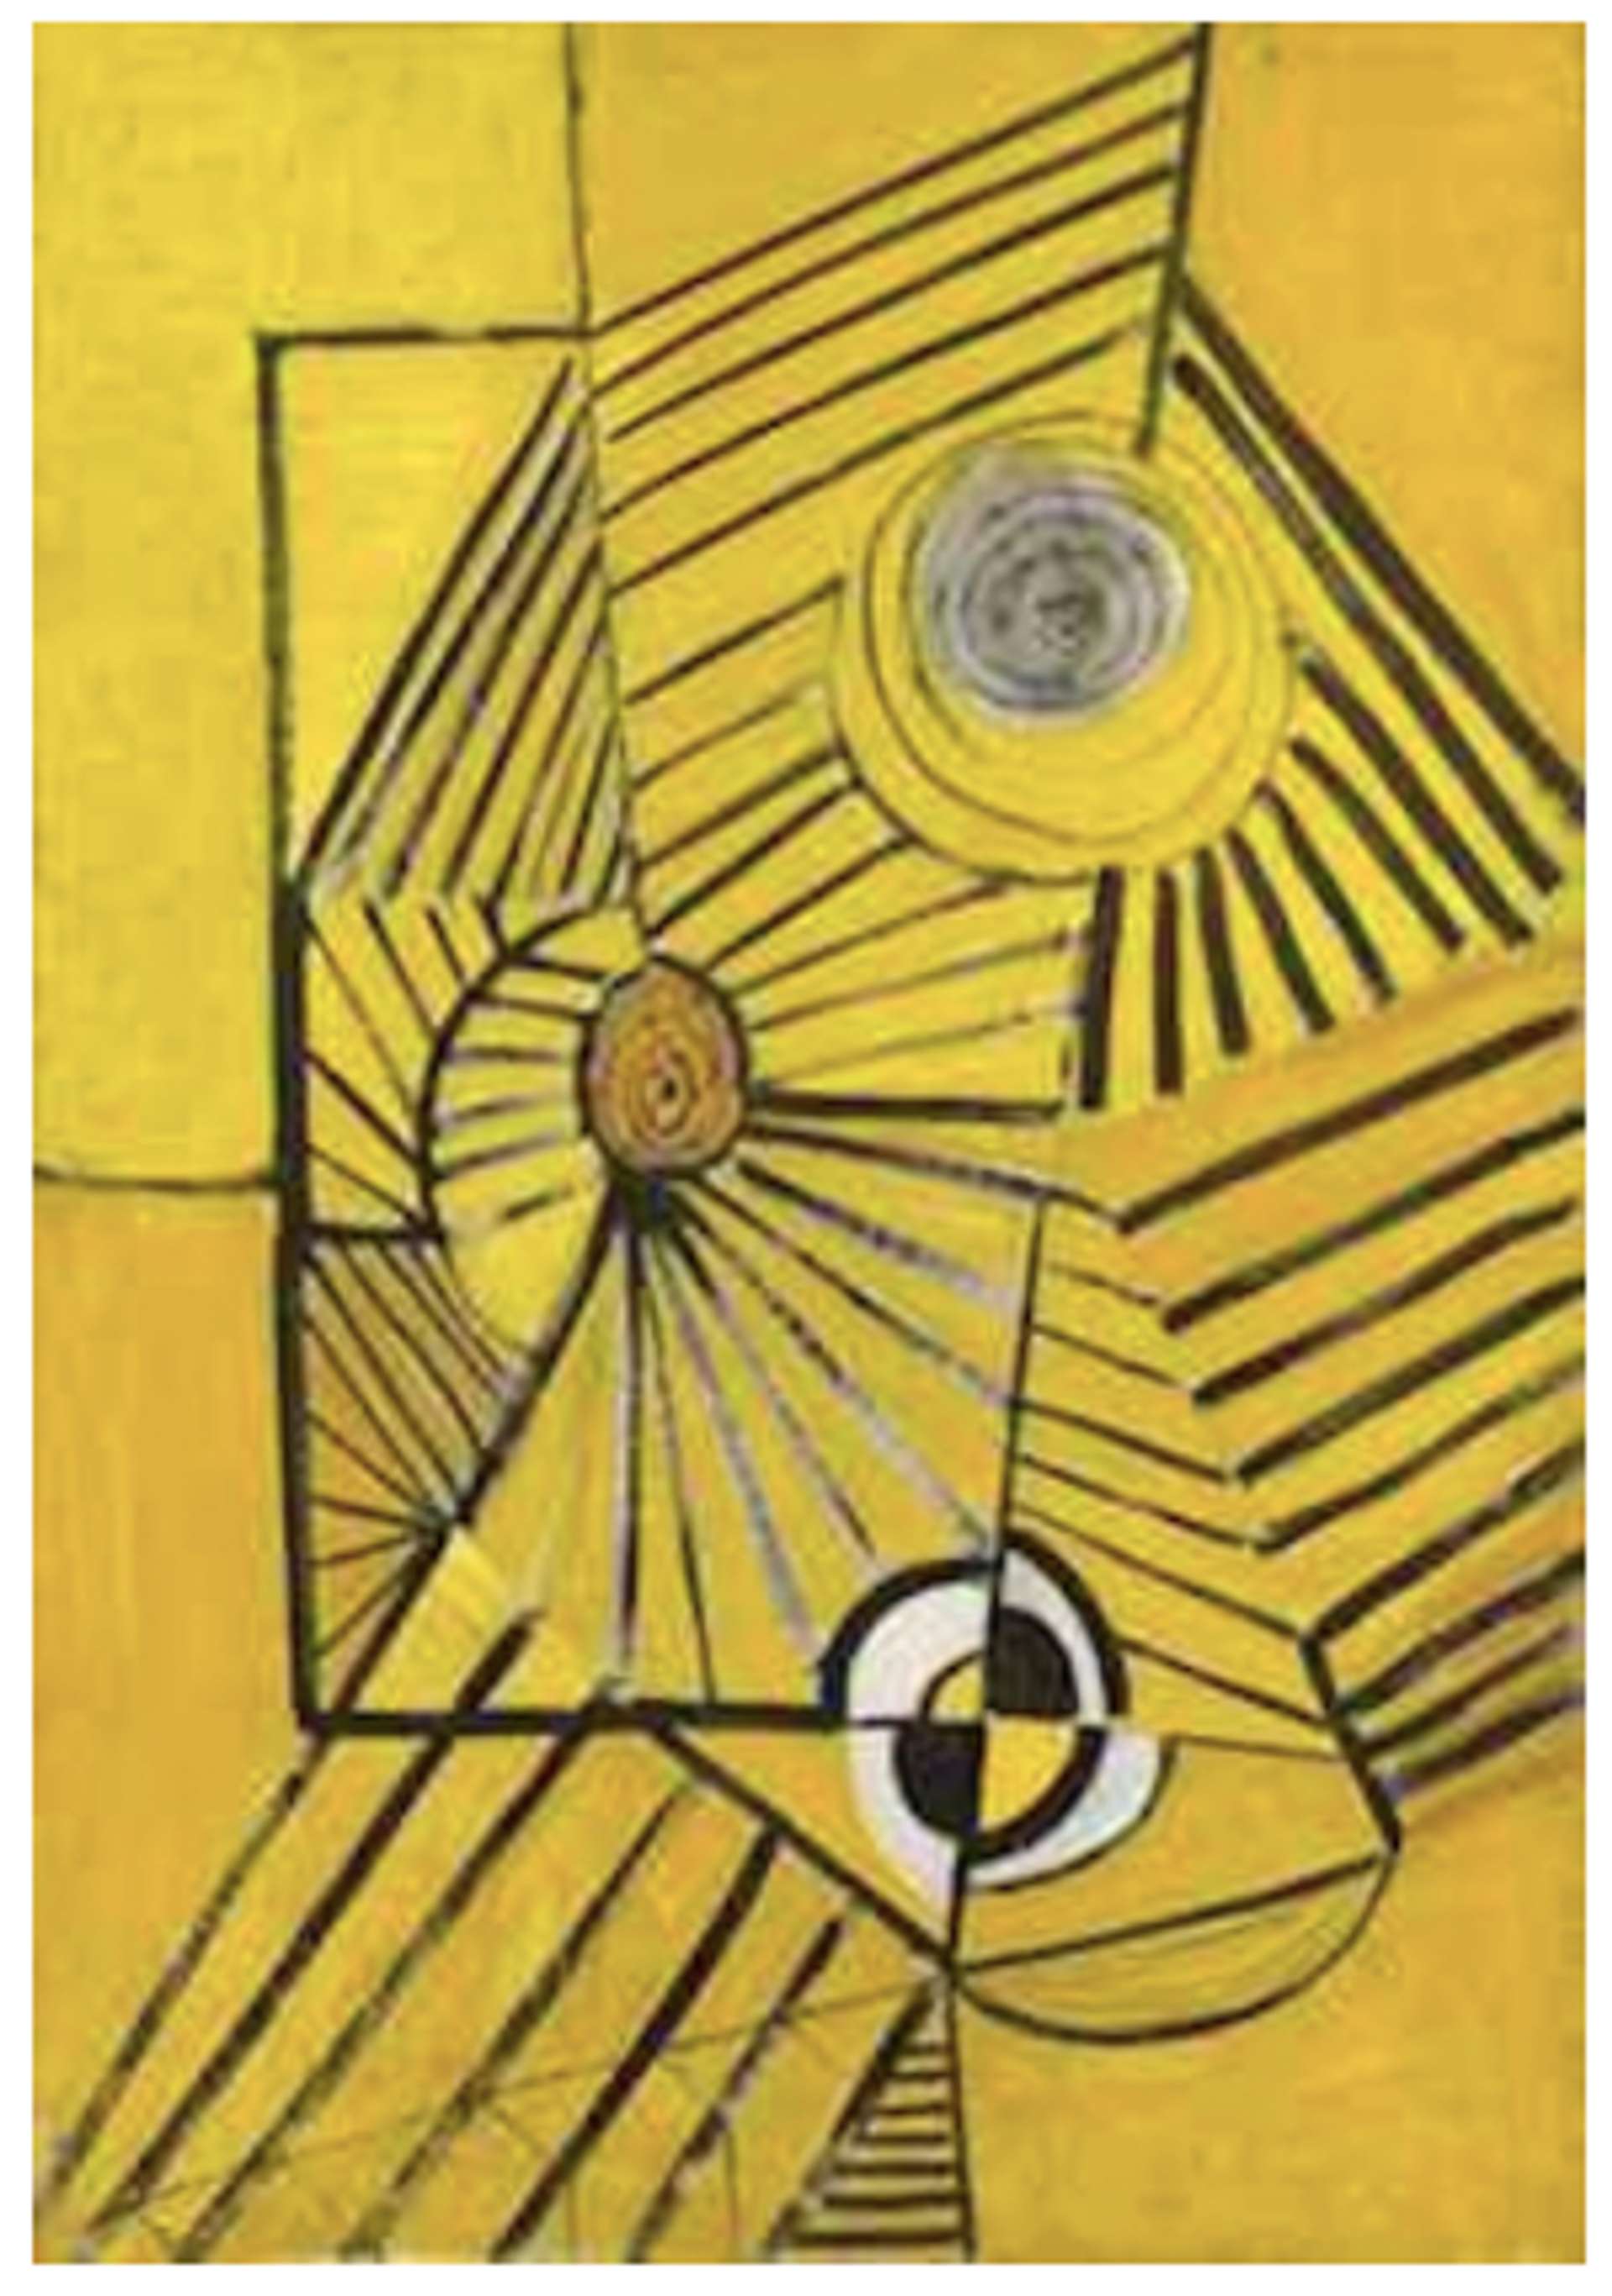  A light yellow canvas embellished with slender black lines, creating overlapping geometric shapes adorned with vertical and horizontal patterns. Each discernible shape in the composition is accompanied by a filled-in circle at its centre, showcasing intricate designs.